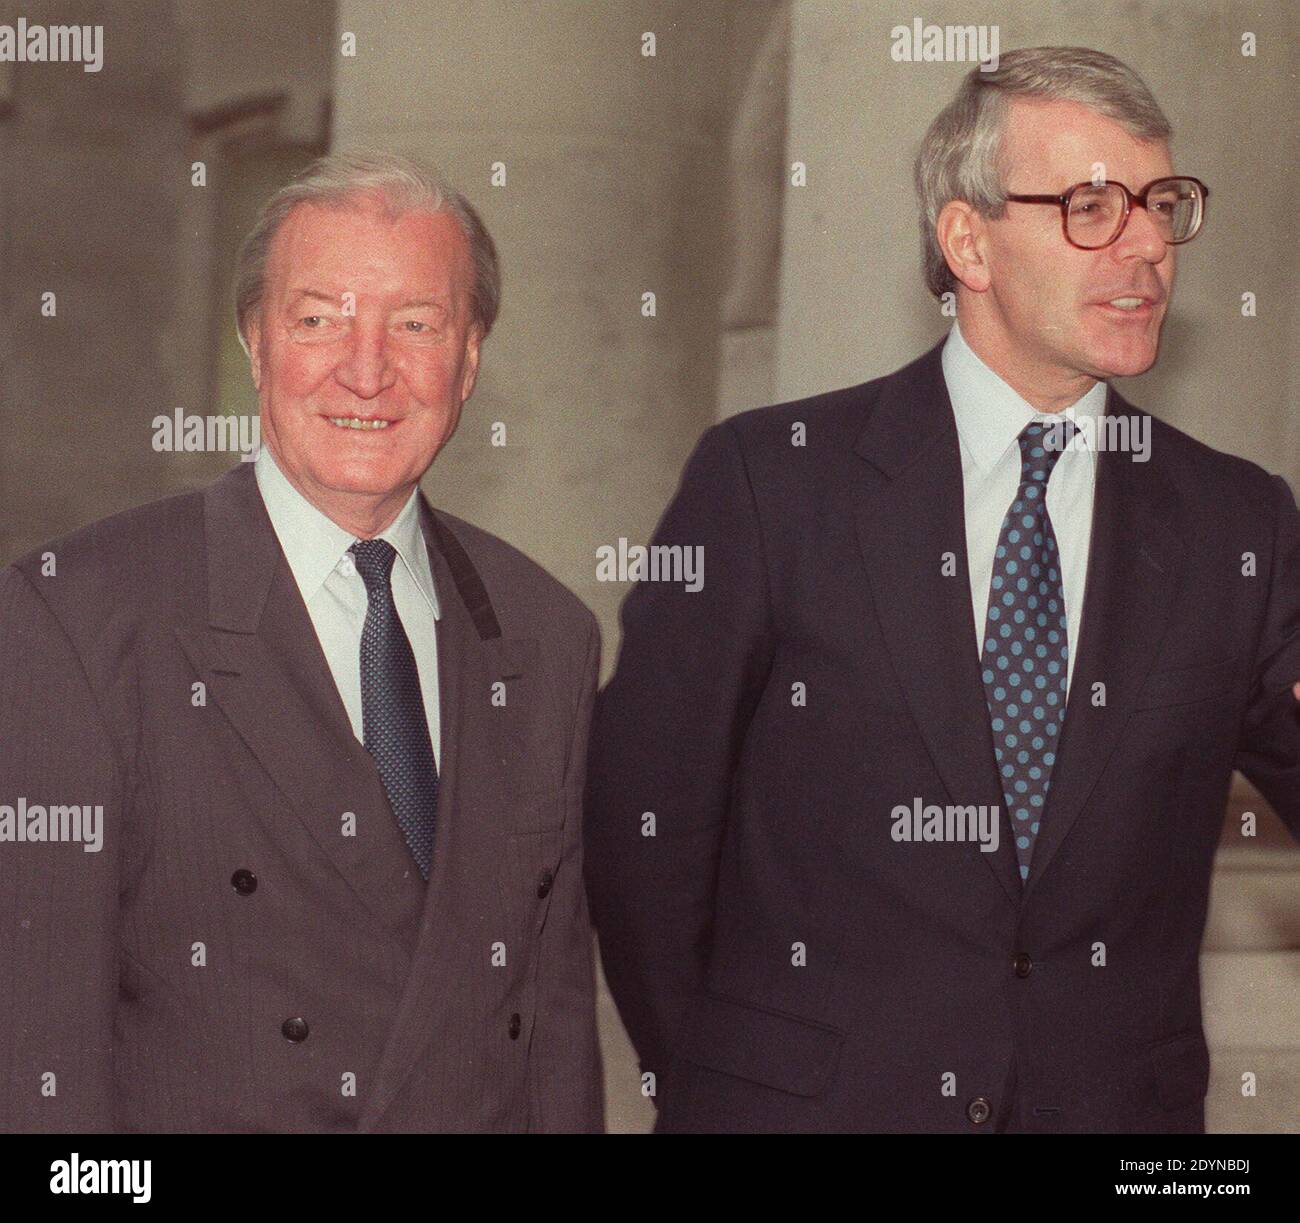 File photo dated 04/12/91 of former British Prime Minister John Major during his visit to Dublin for talks with former Irish Prime Minister Charles Haughey. The Irish government refused a request from the Birmingham Six to act as bail guarantors amid concerns it could prove embarrassing, state files reveal. Stock Photo